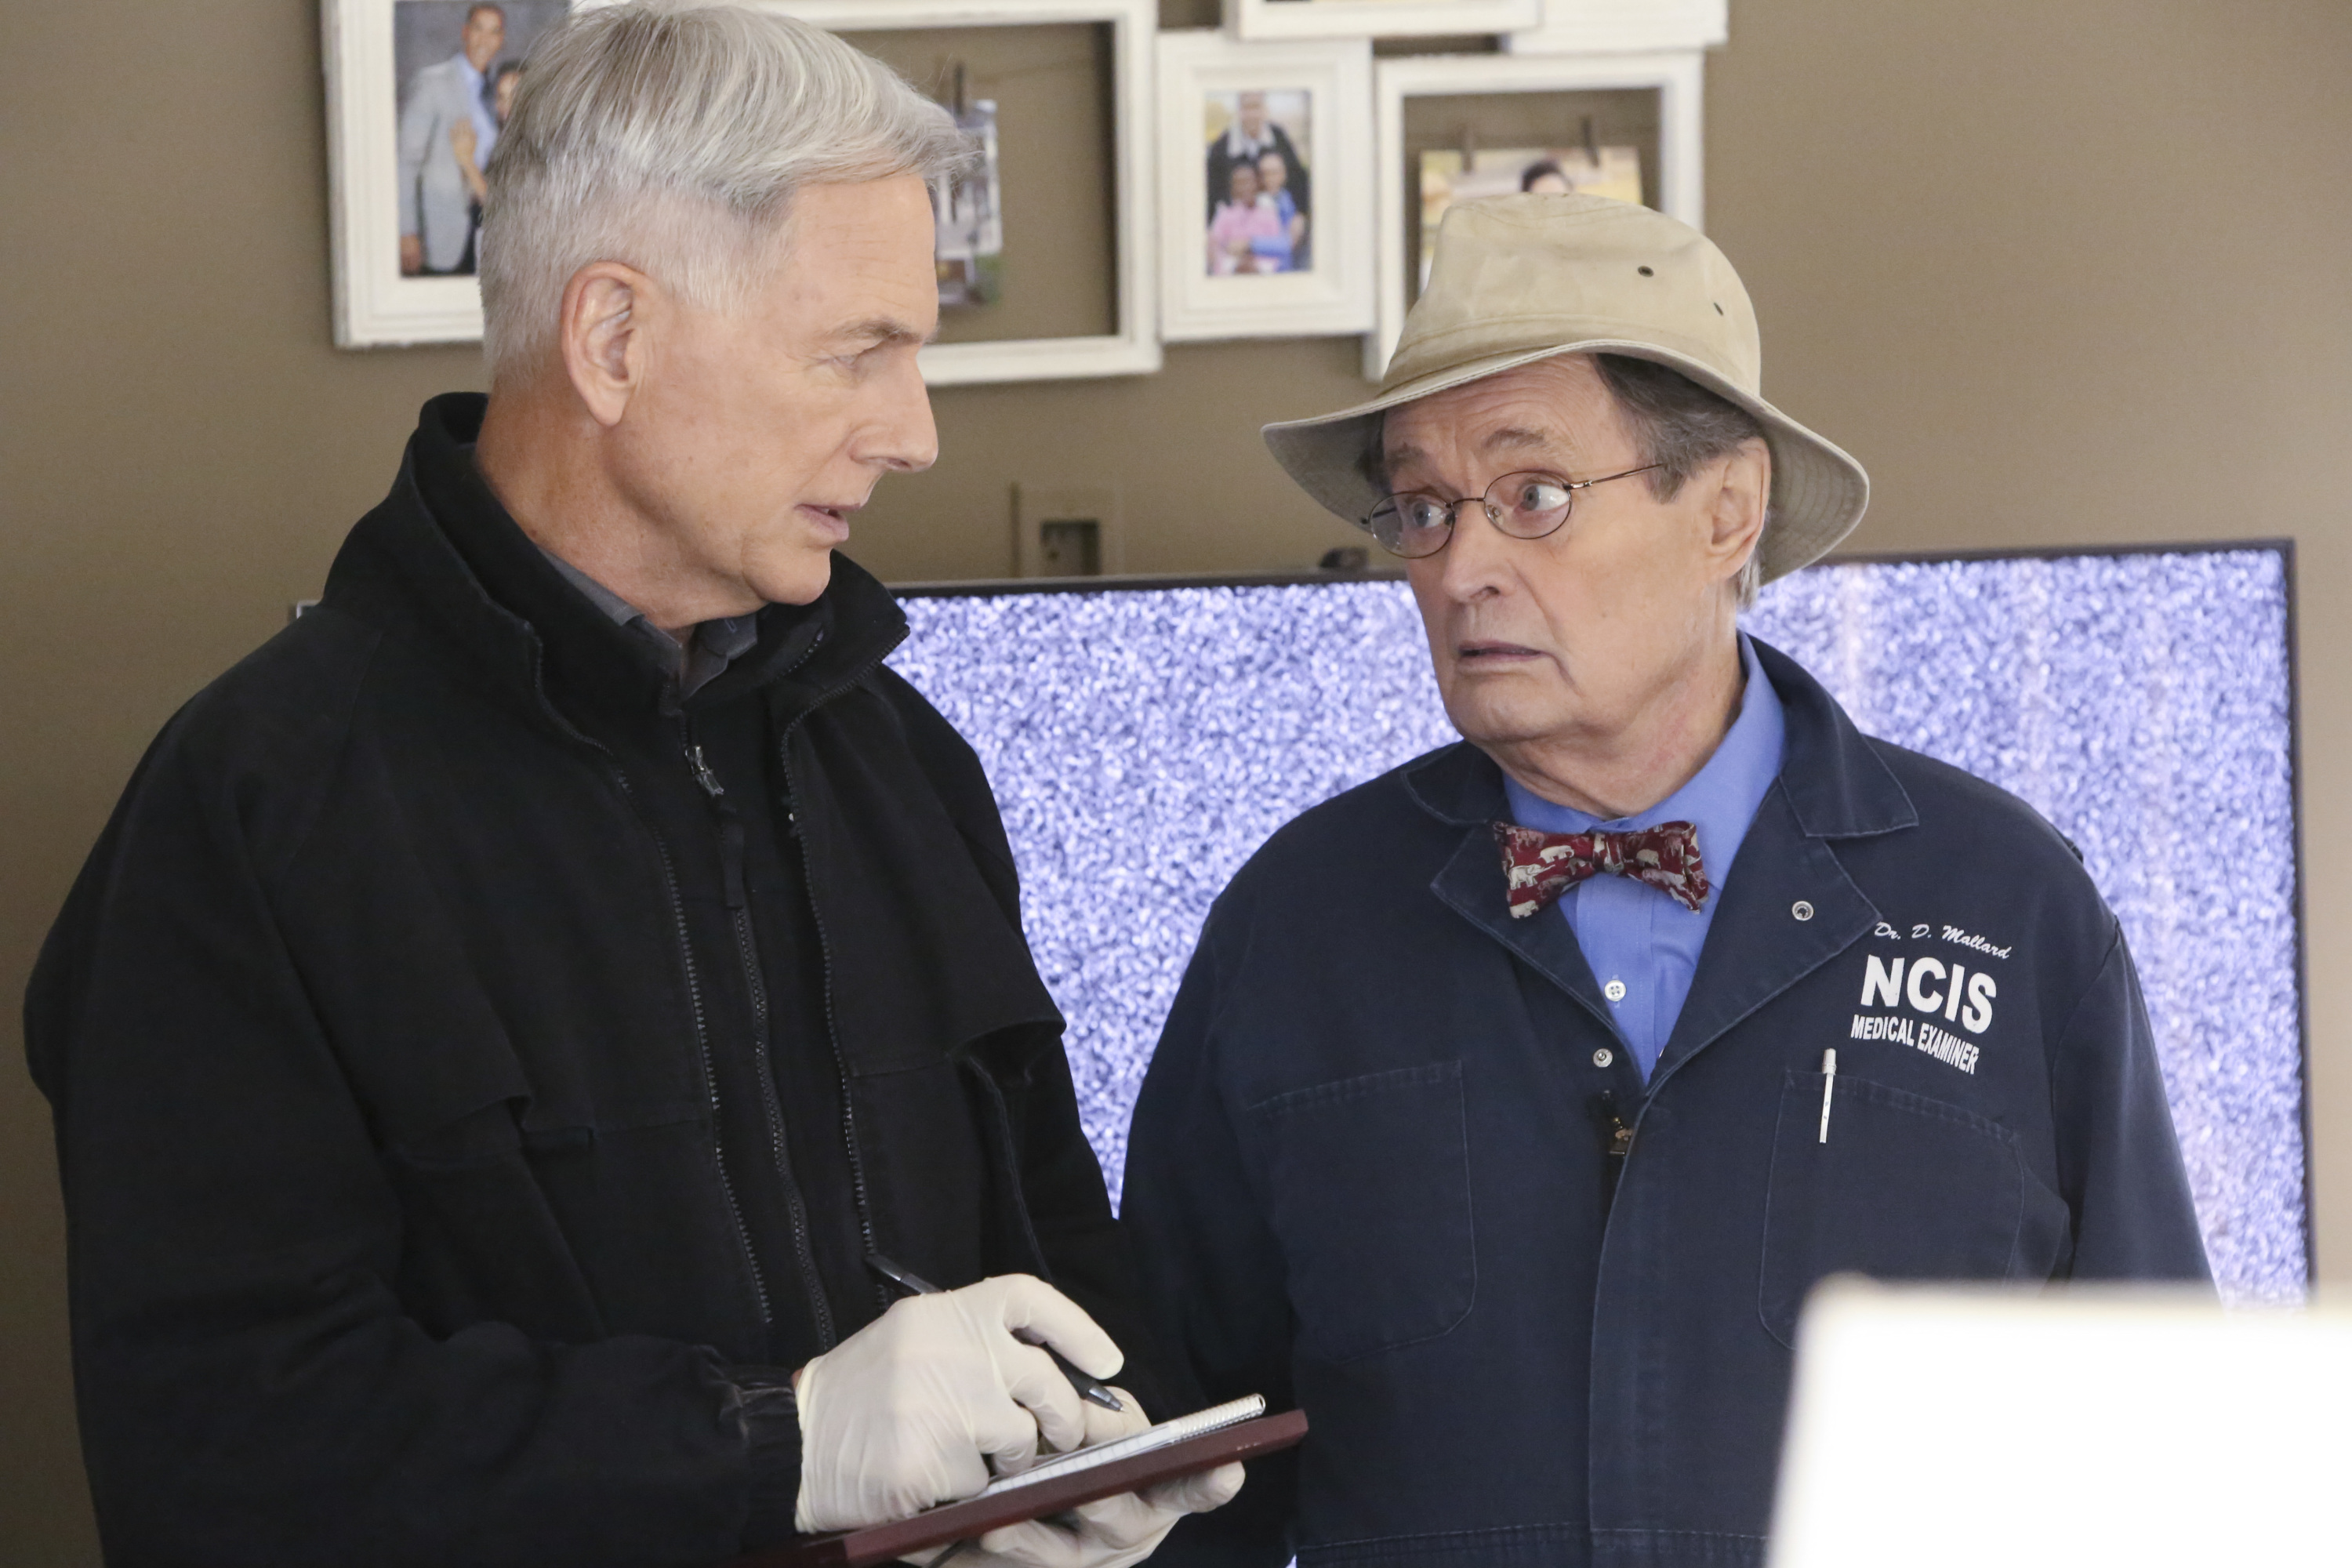 Mark Harmon and David McCallum on the set of “NCIS” on January 11, 2017 | Source: Getty Images